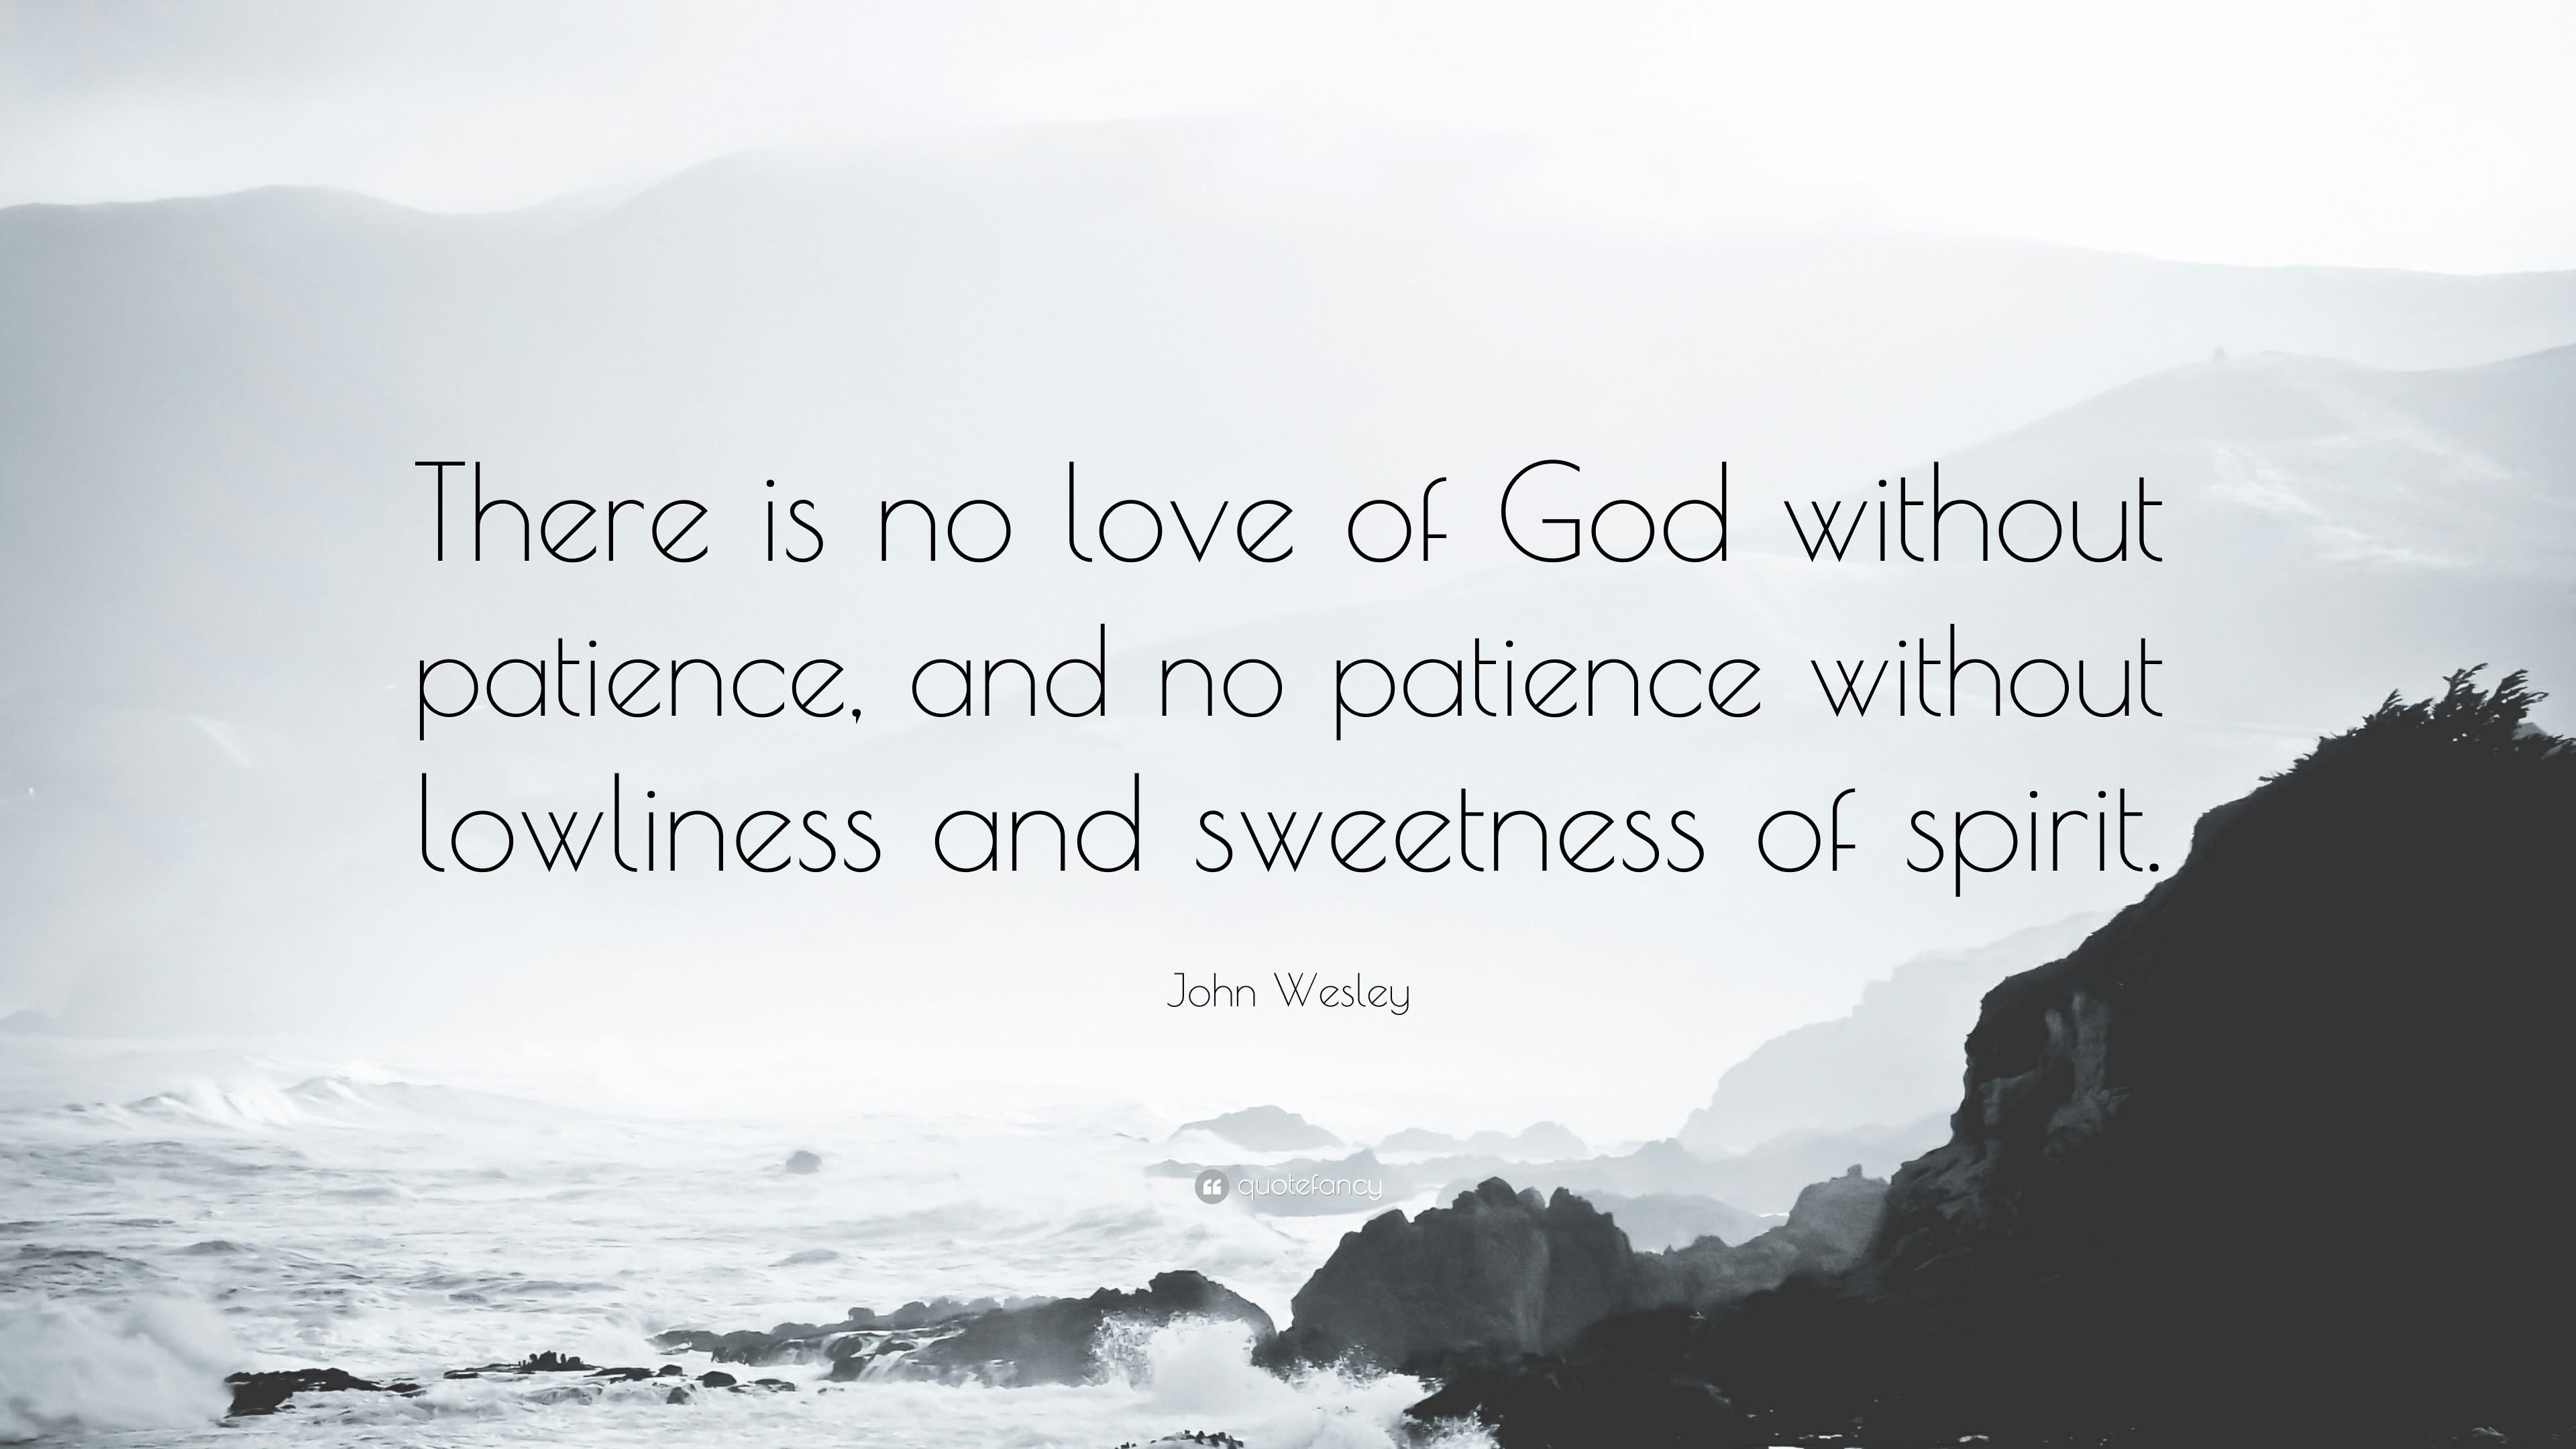 3840x2160 John Wesley Quote: “There is no love of God without patience, and no